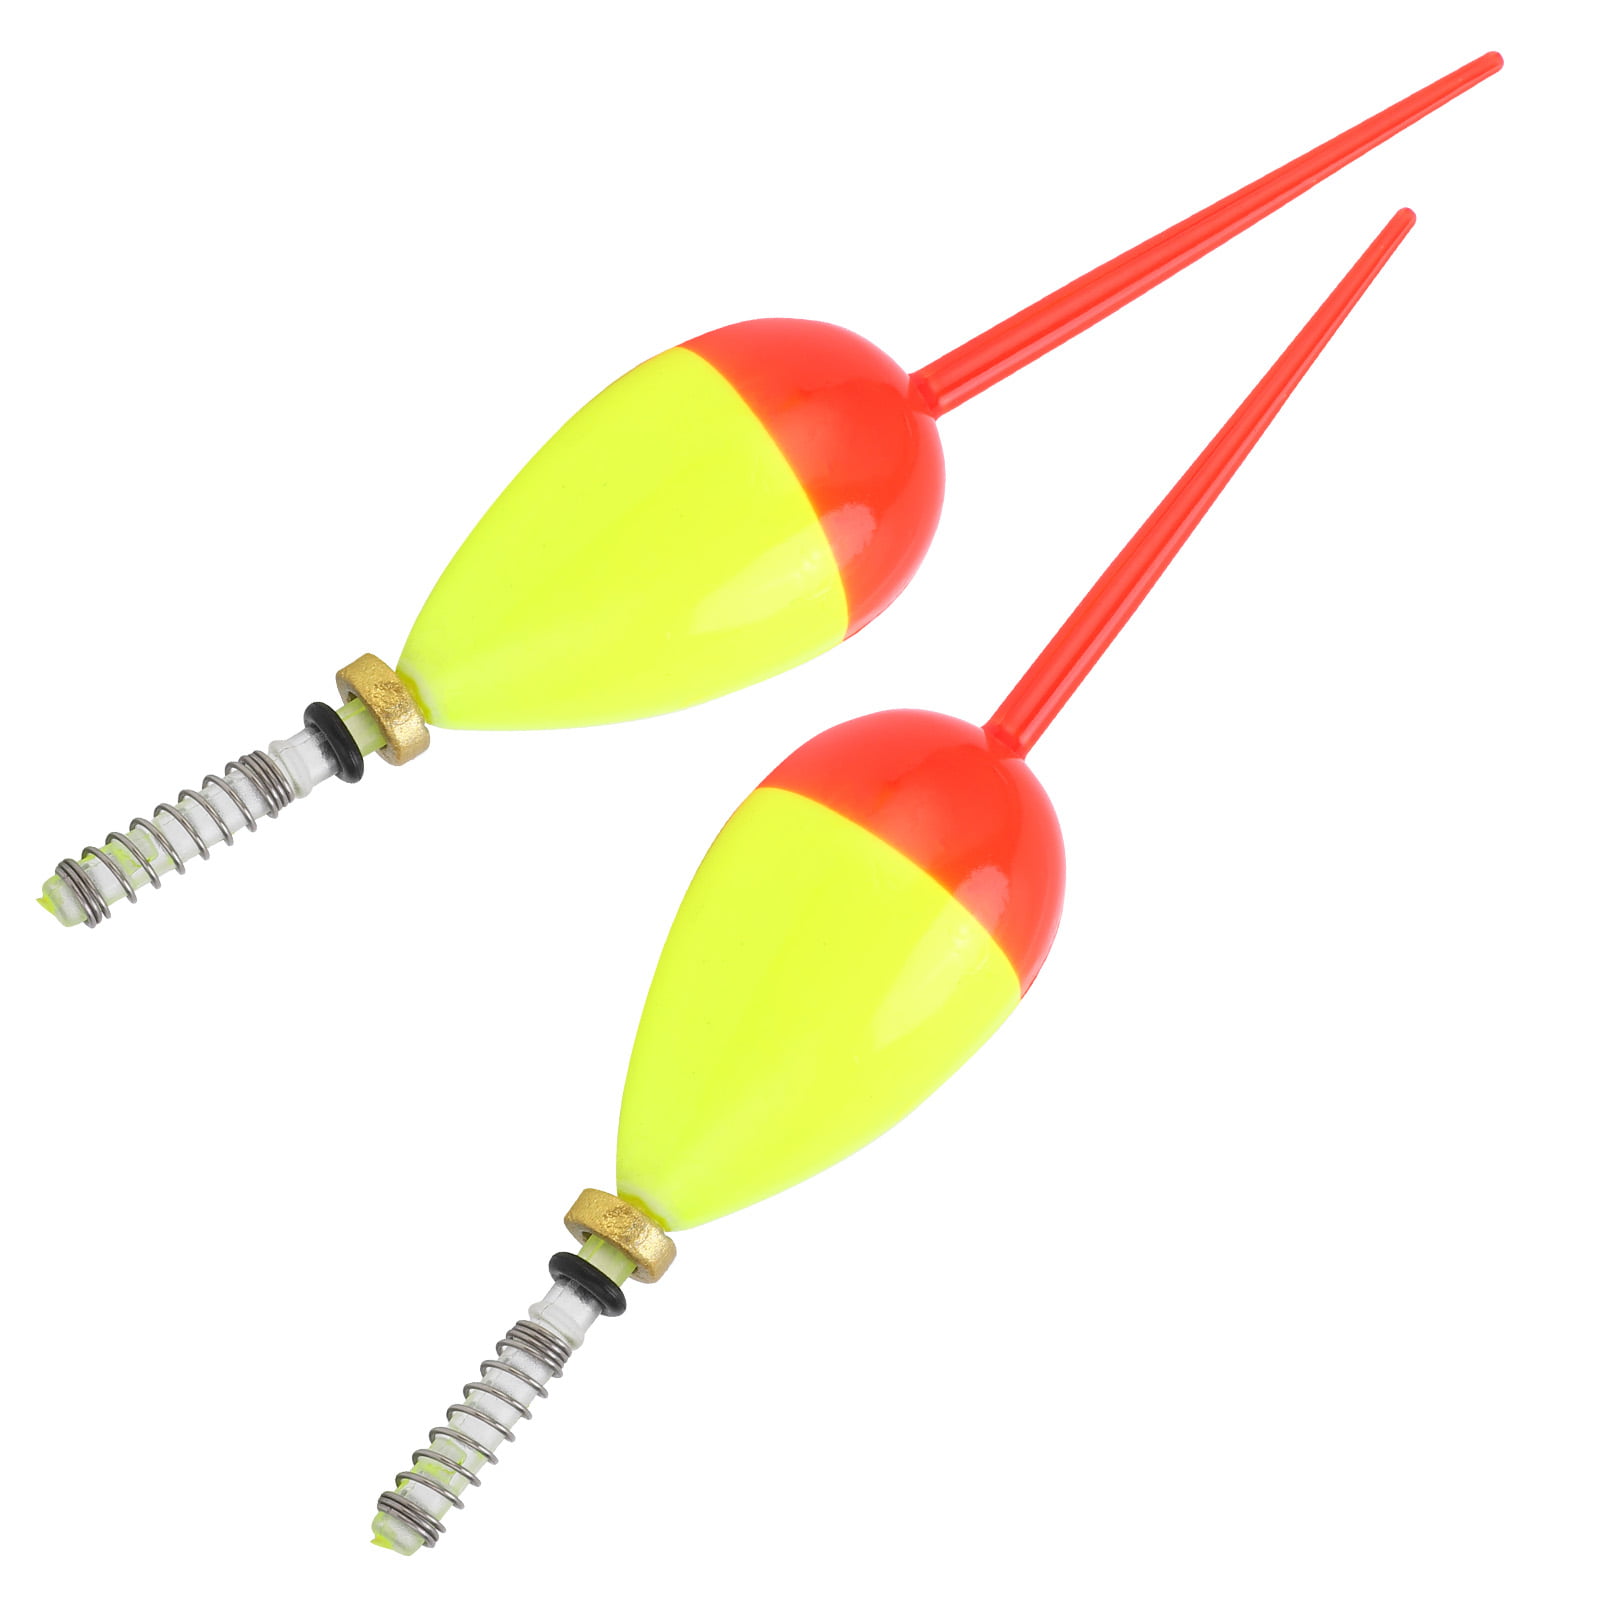  FECAMOS Foam Fishing Floats, Fishing Lure Float Balls  FishingFishing Accessories Ultra-Light Fishing Bobbers 0.7/0.5in for  Outdoor for Freshwater Fish(4#) : Sports & Outdoors